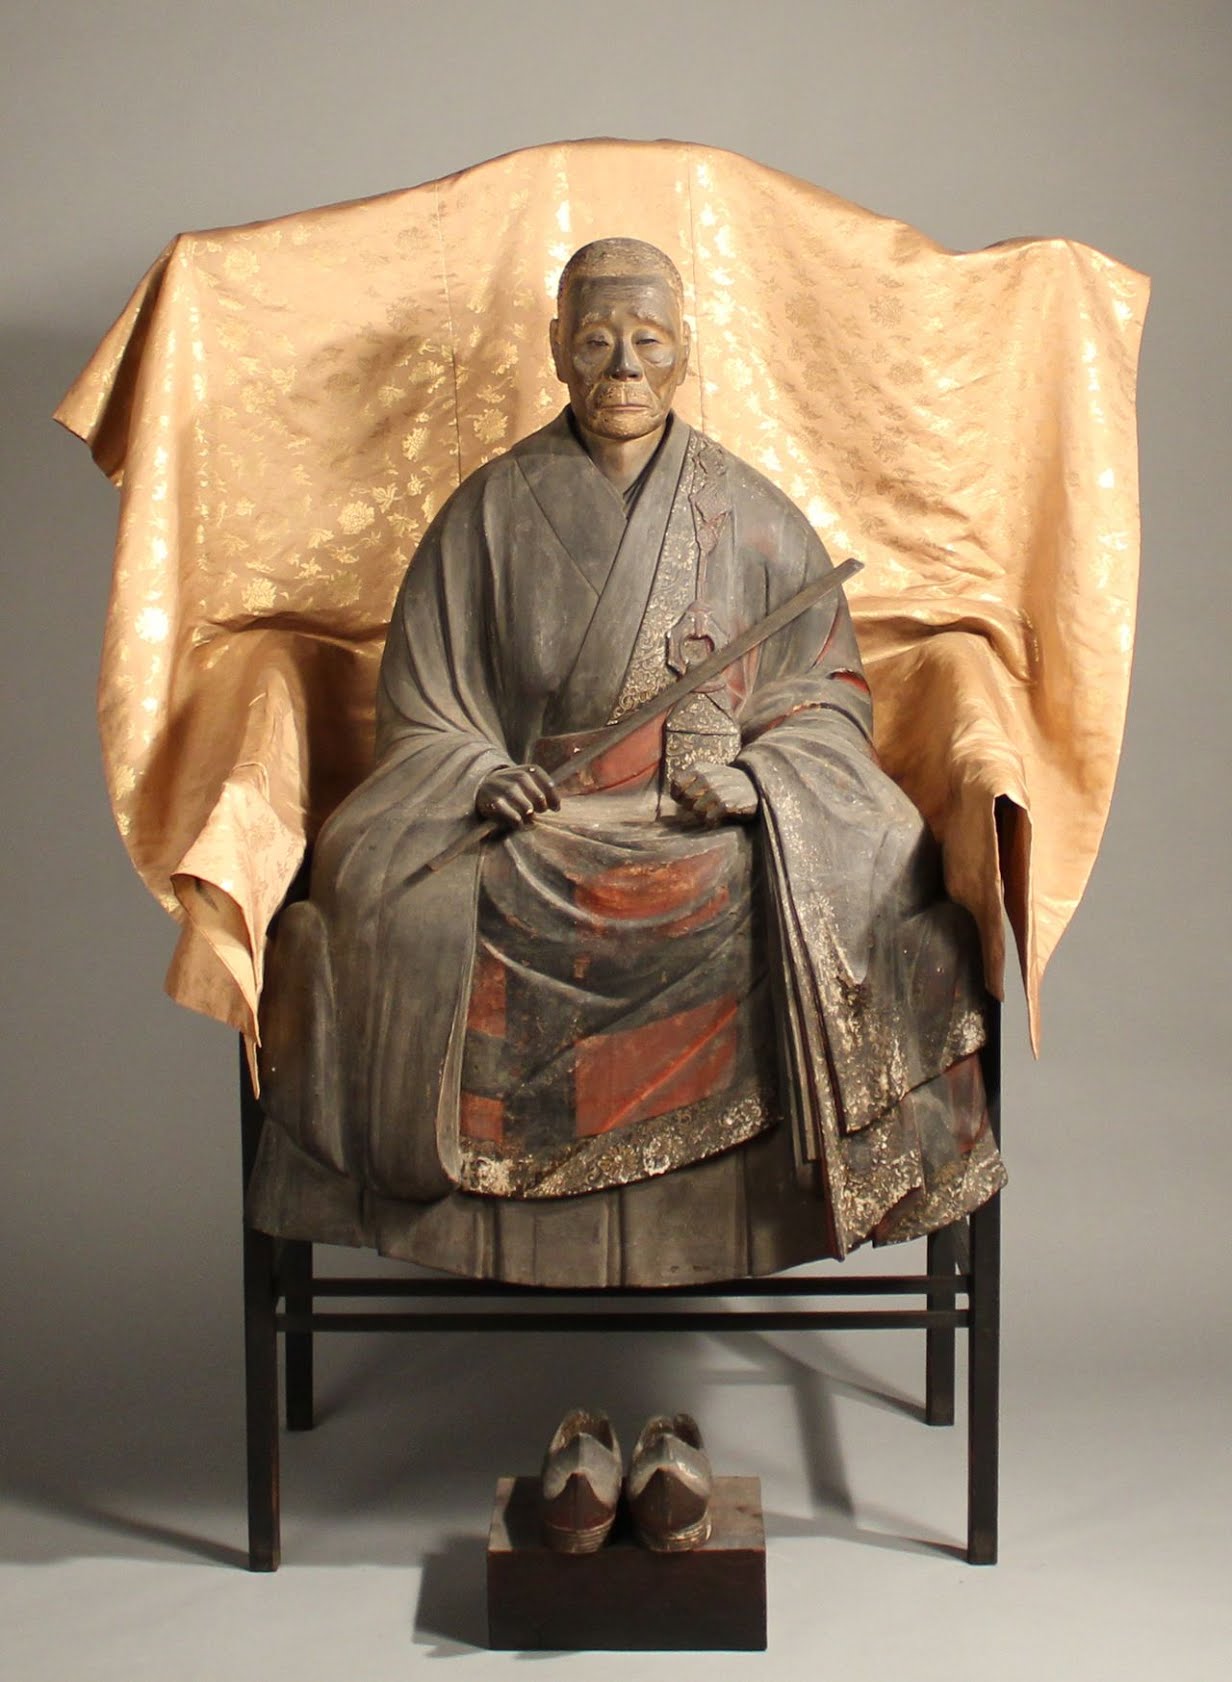 A wooden statue of Ikkyū at Shūon’an